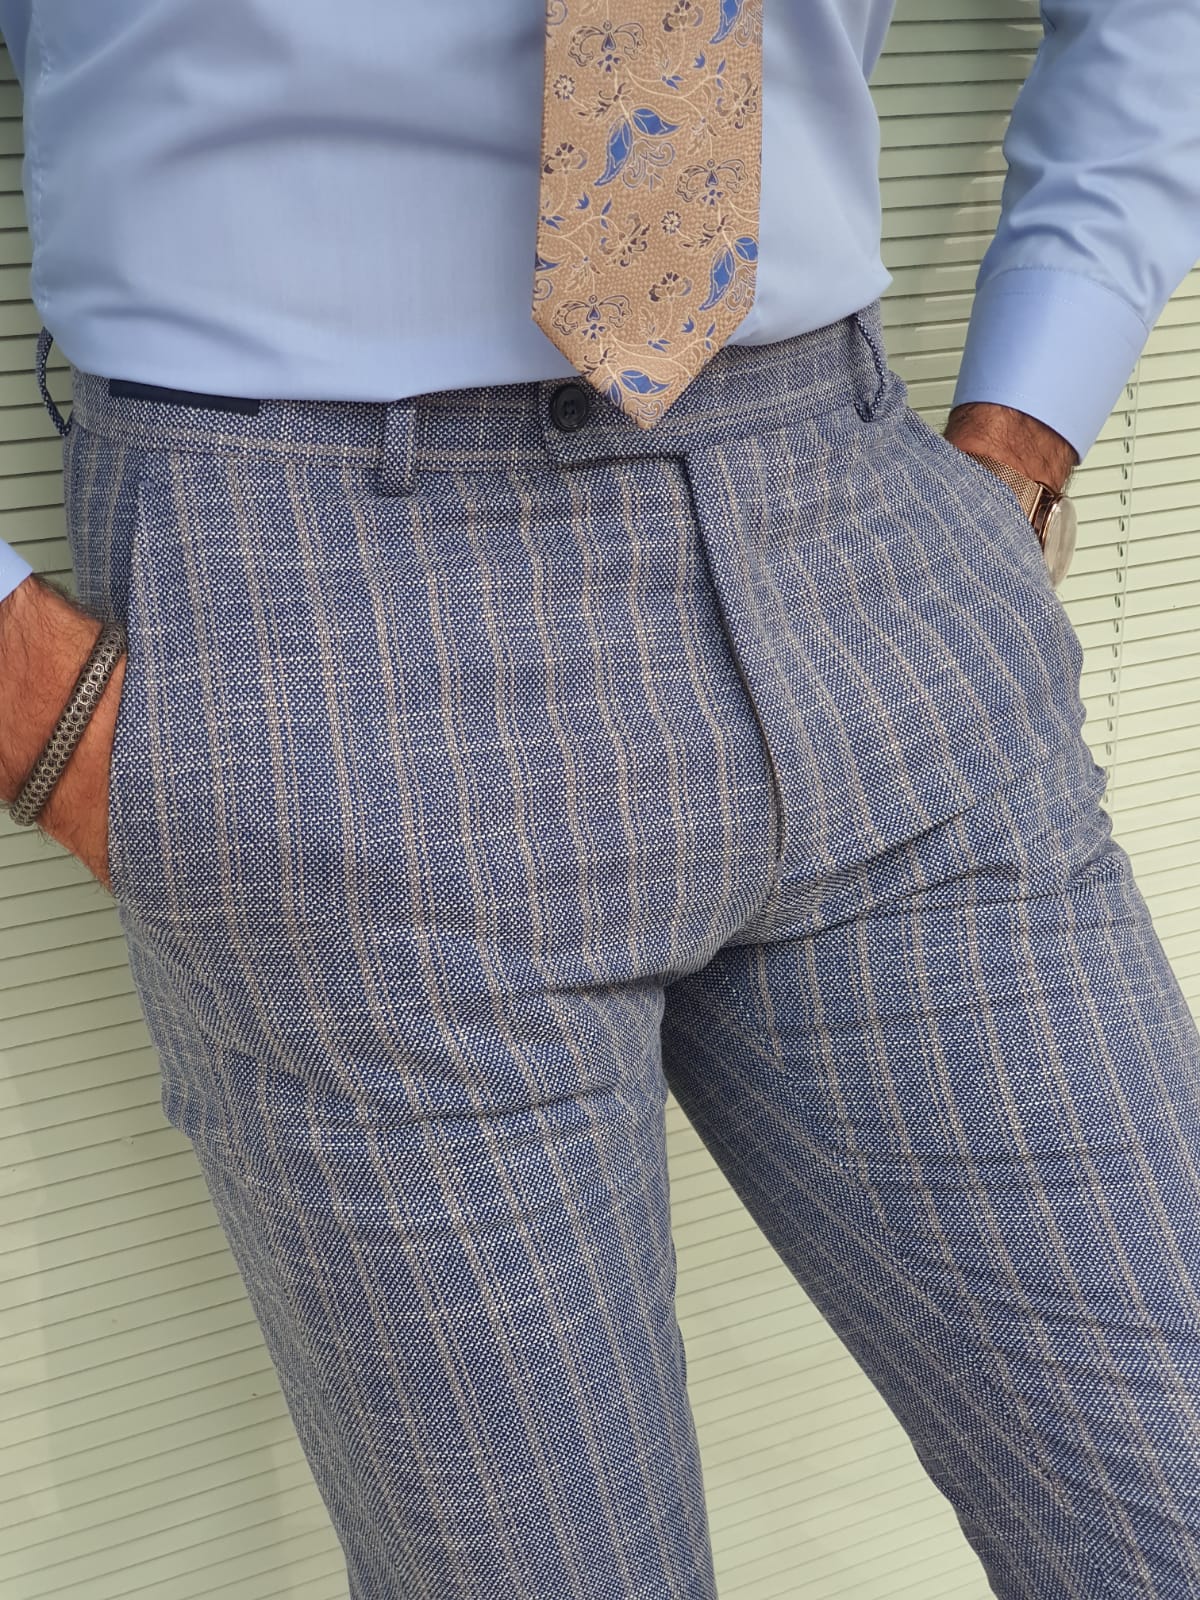 NAVYBLUE & BEIGE SLIM-FIT SPECIAL EDITION* PLAID FABRIC PANTS